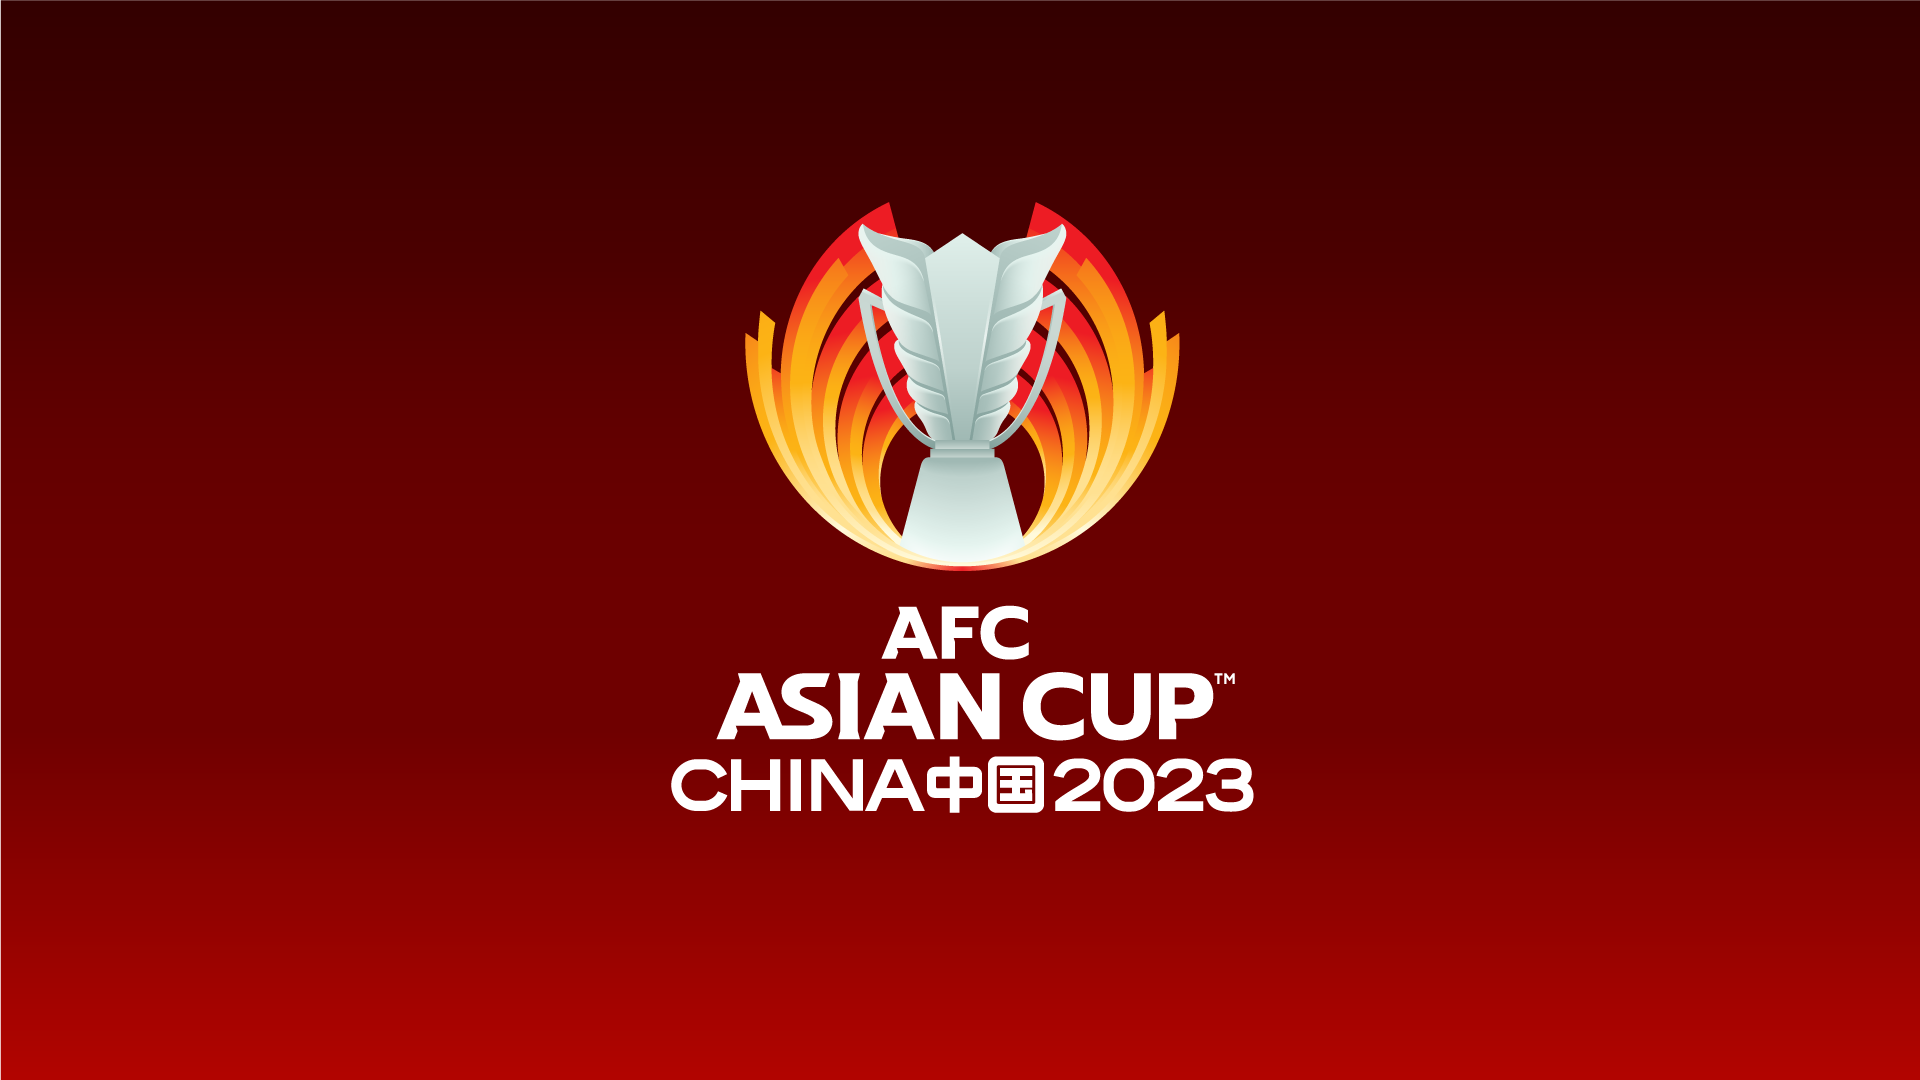 Champions again: Dordoi extend Kyrgyz Premier League record with 13th titleAFC Women’s Asian Cup India 2022 cast confirmed 2021 AFC Champions League: The Week in NumbersAFC Asian Cup China 2023™ Logo launched in glittering opening ceremonyAFC U23 Asian Cup 2022 Qualifiers: Ones to WatchAustralia's Gustavsson praises players, fans after superb victory over BrazilGoalkeeper Yoon hoping to inspire Korea Republic against USA again